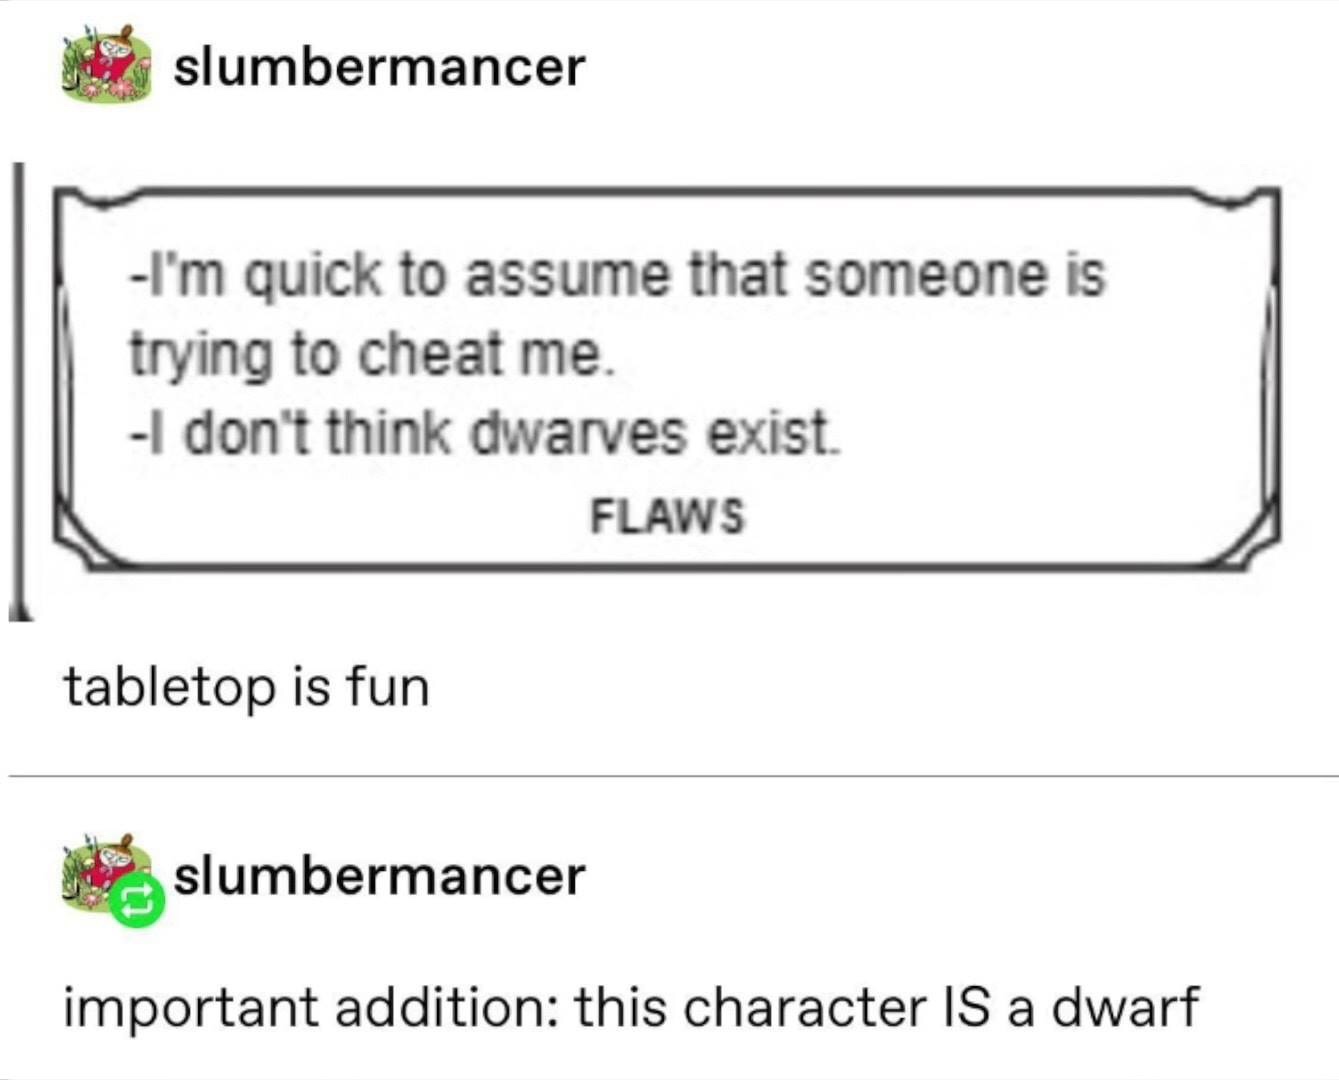 document - u slumbermancer I'm quick to assume that someone is trying to cheat me. I don't think dwarves exist. Flaws tabletop is fun slumbermancer important addition this character Is a dwarf